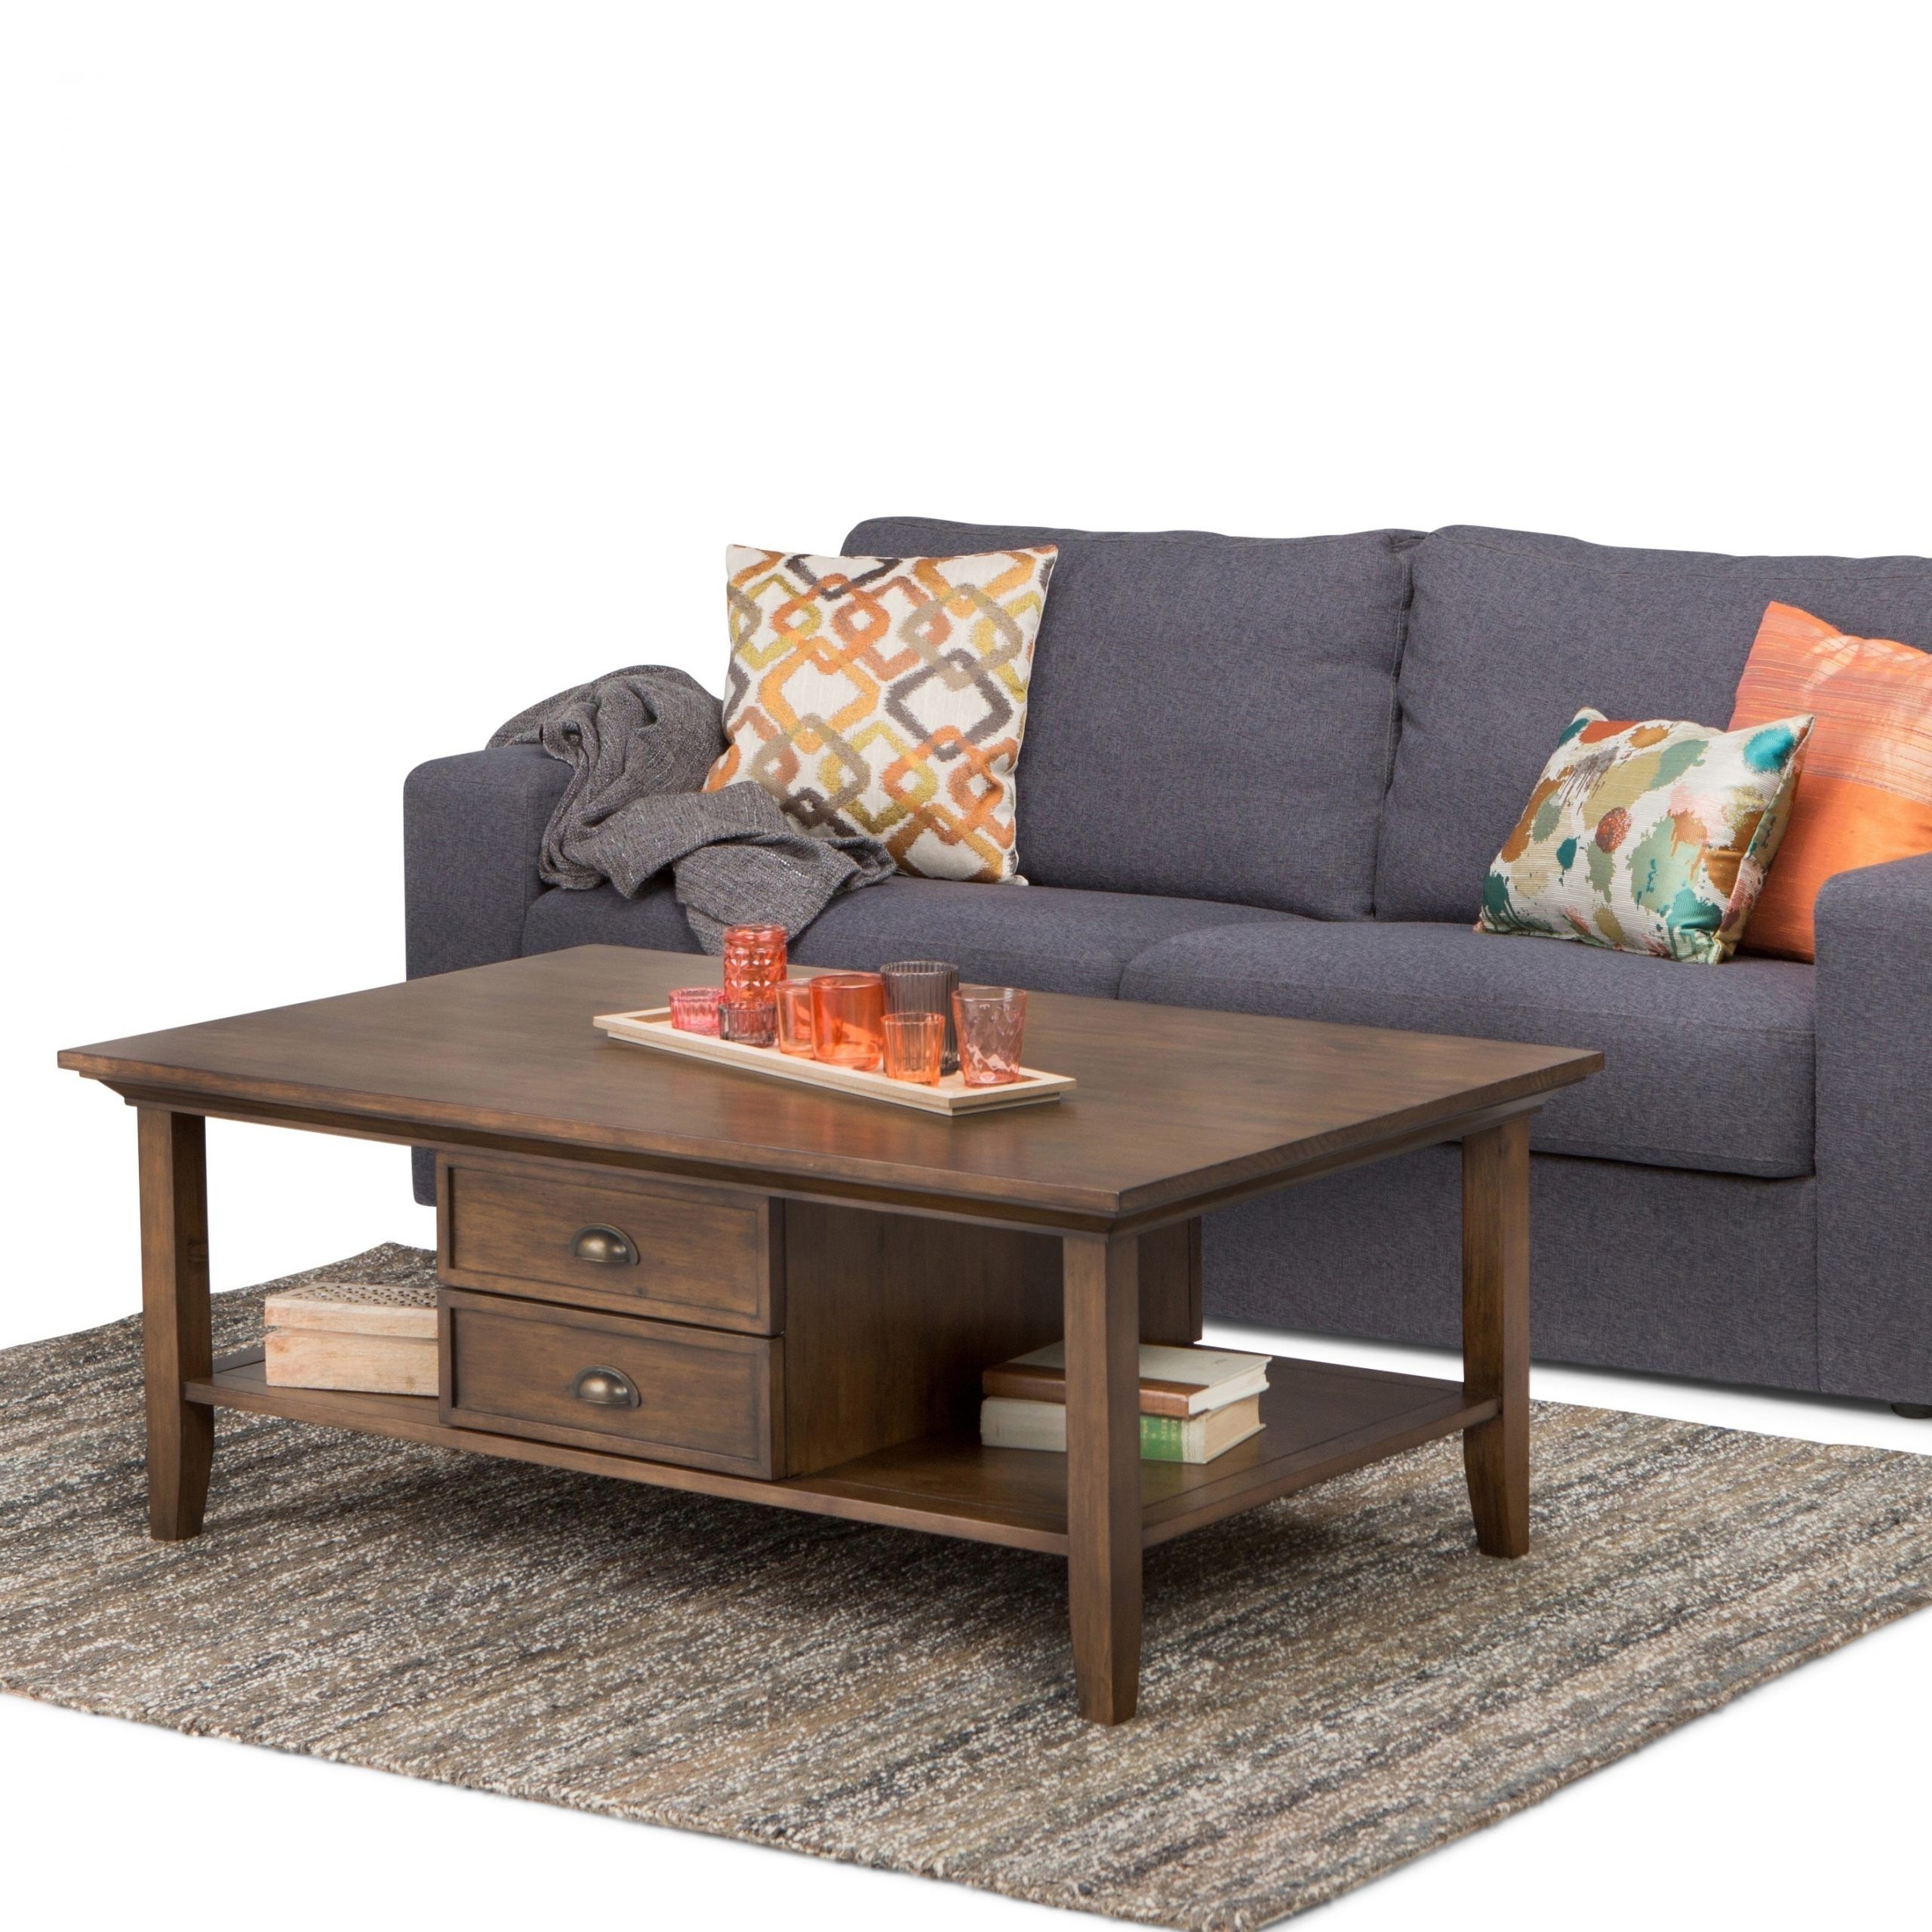 Trendy Natural Wood Coffee Tables Inside Wyndenhall Mansfield Solid Wood 48 Inch Wide Rectangle Rustic Coffee (View 6 of 10)